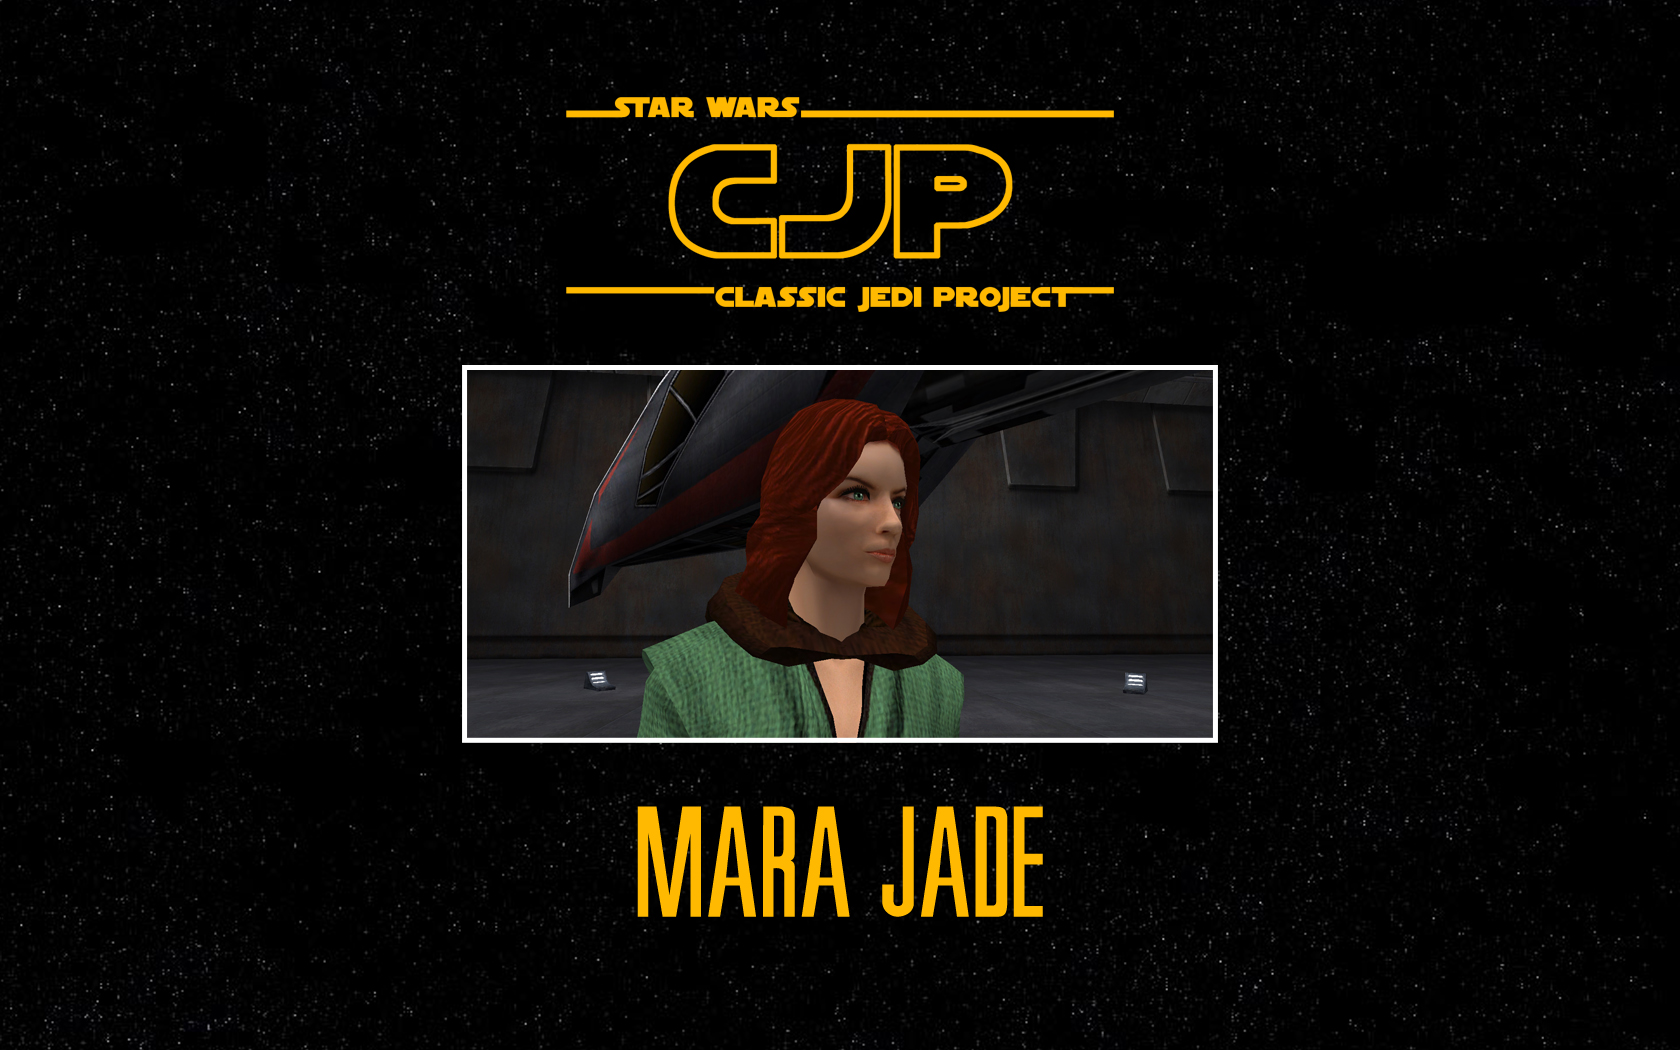 More information about "Classic Jedi Project (CJP) Mara Jade"